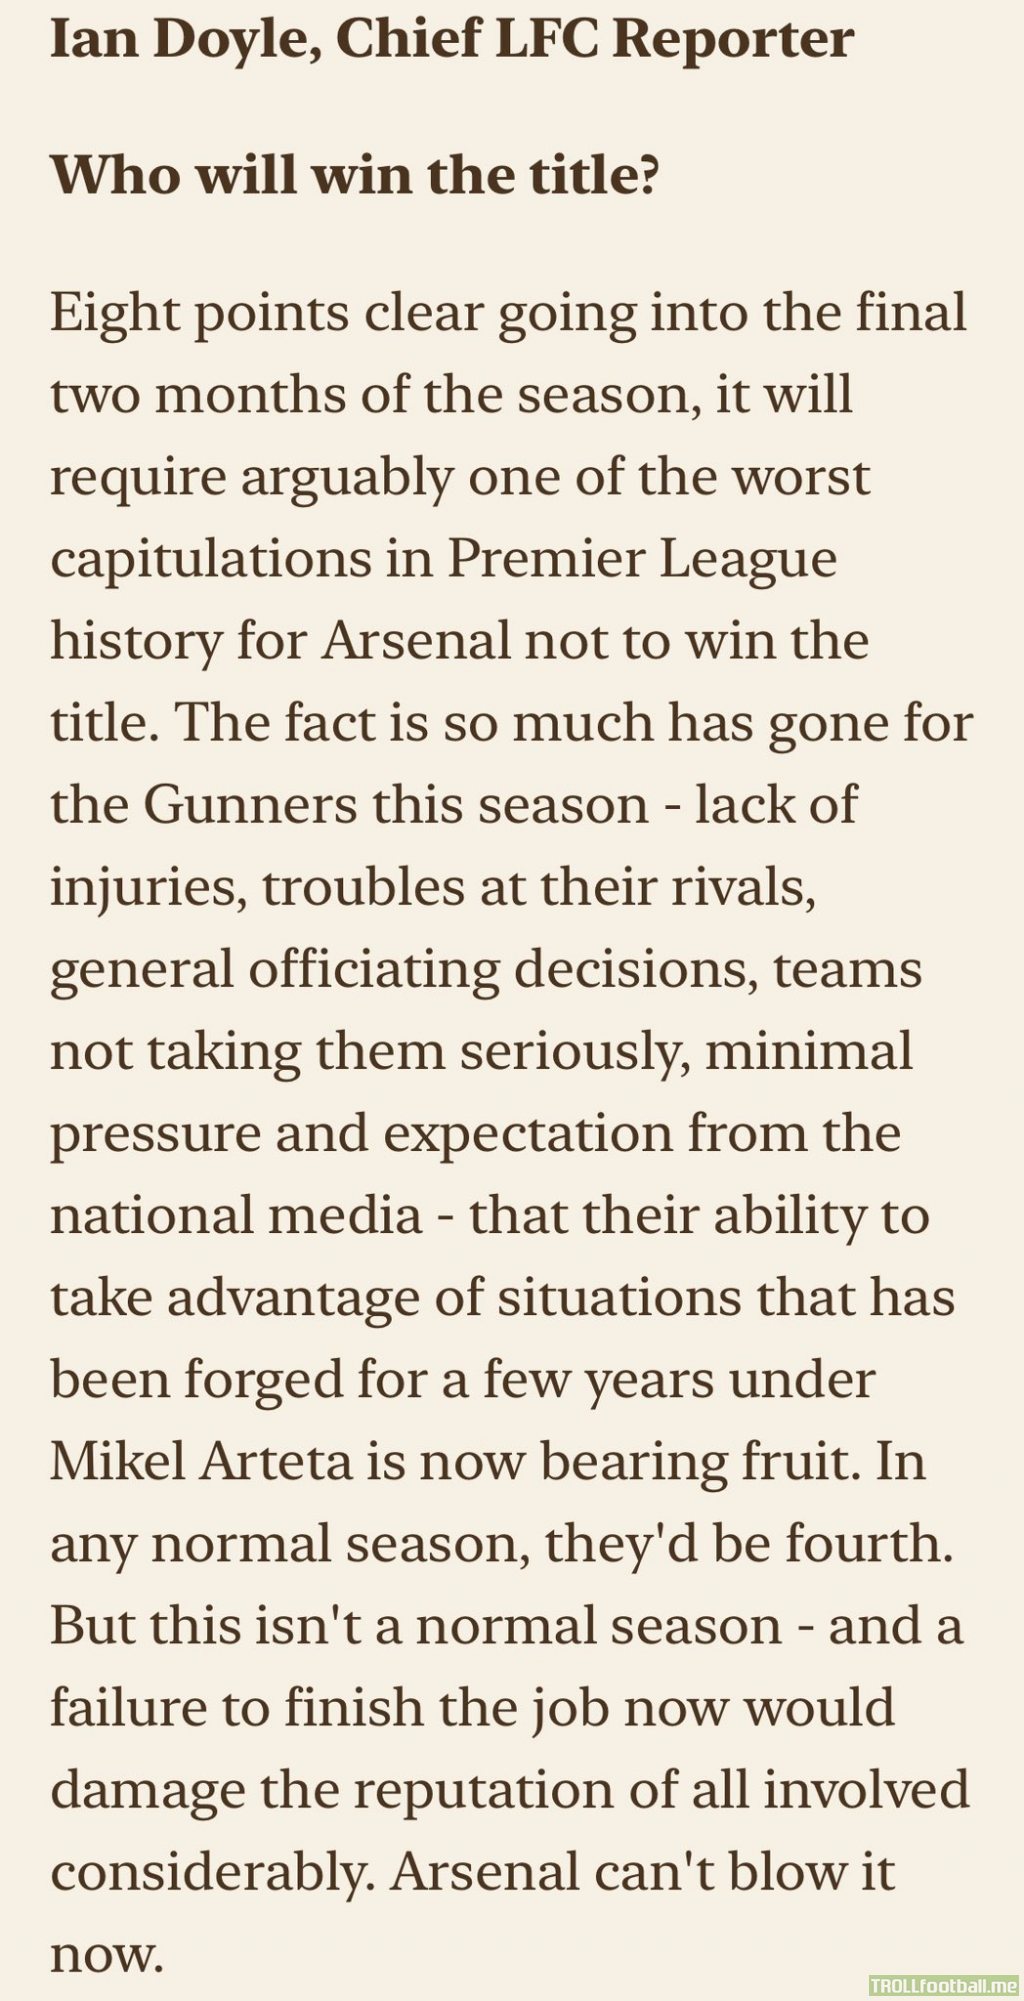 Chief Liverpool commentator for the Echo, commenting on Arsenal this season